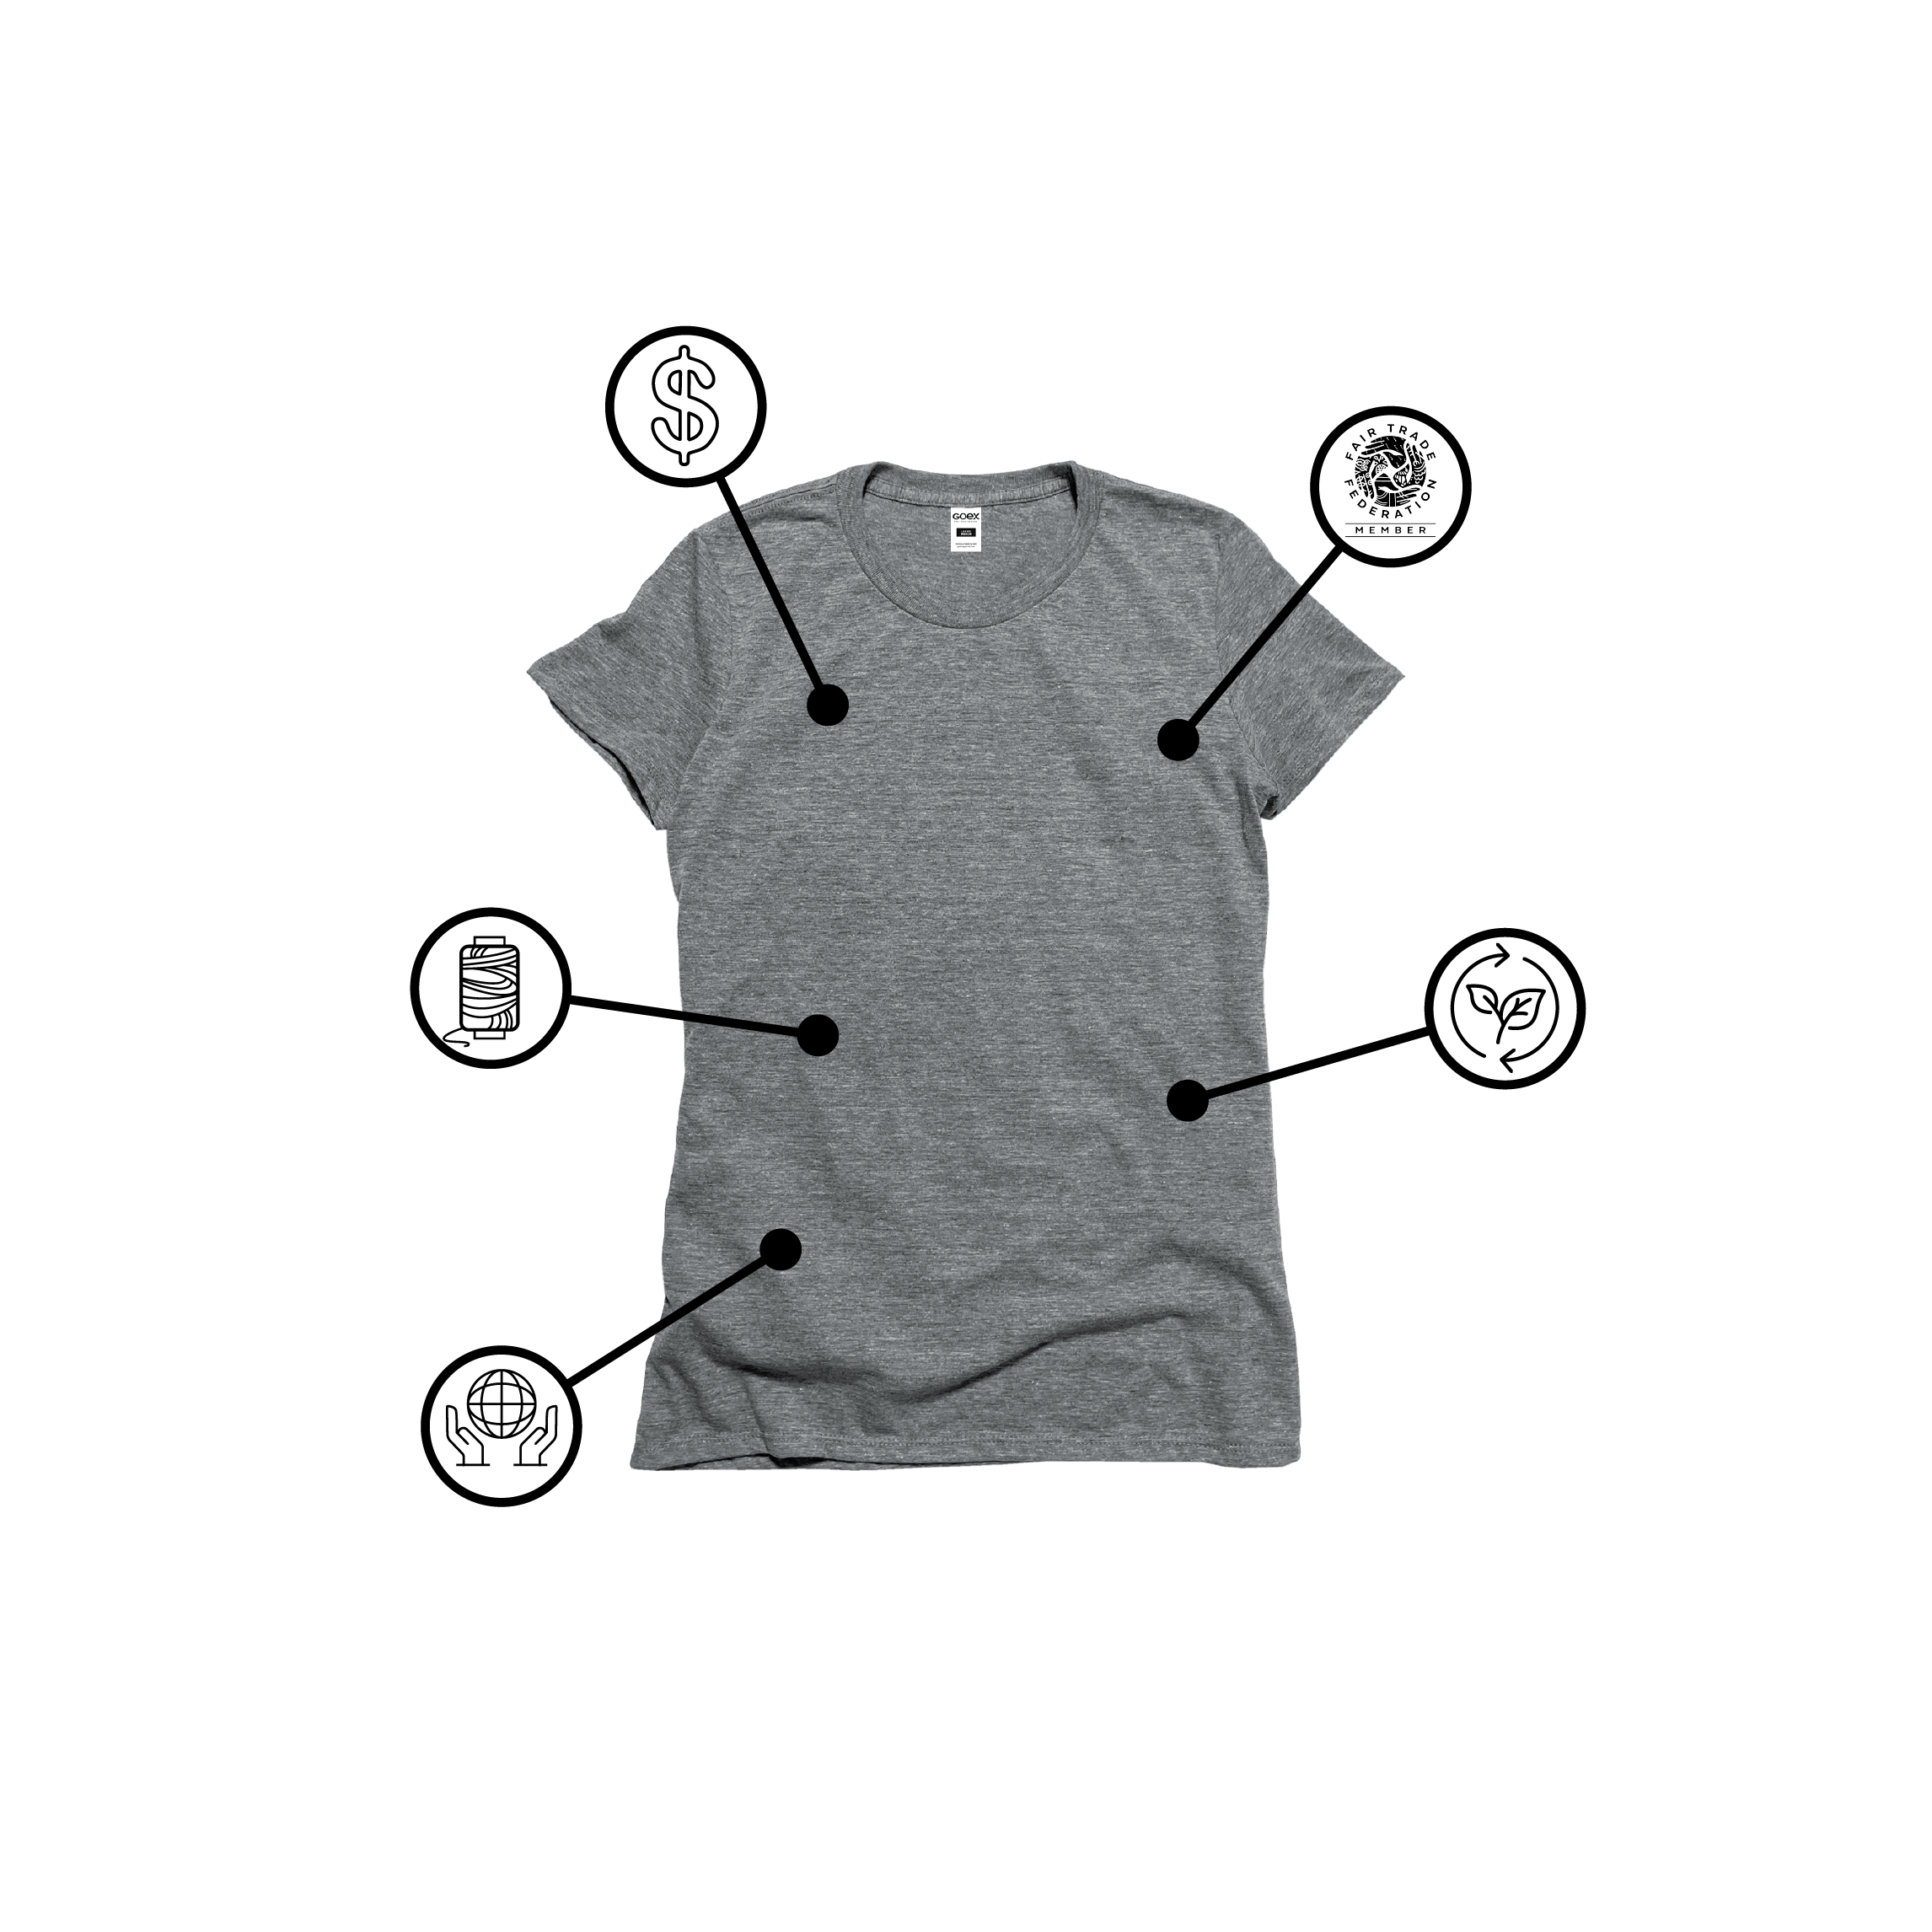 GOEX Eco Triblend Ladies Tee in Heather Grey with Icons